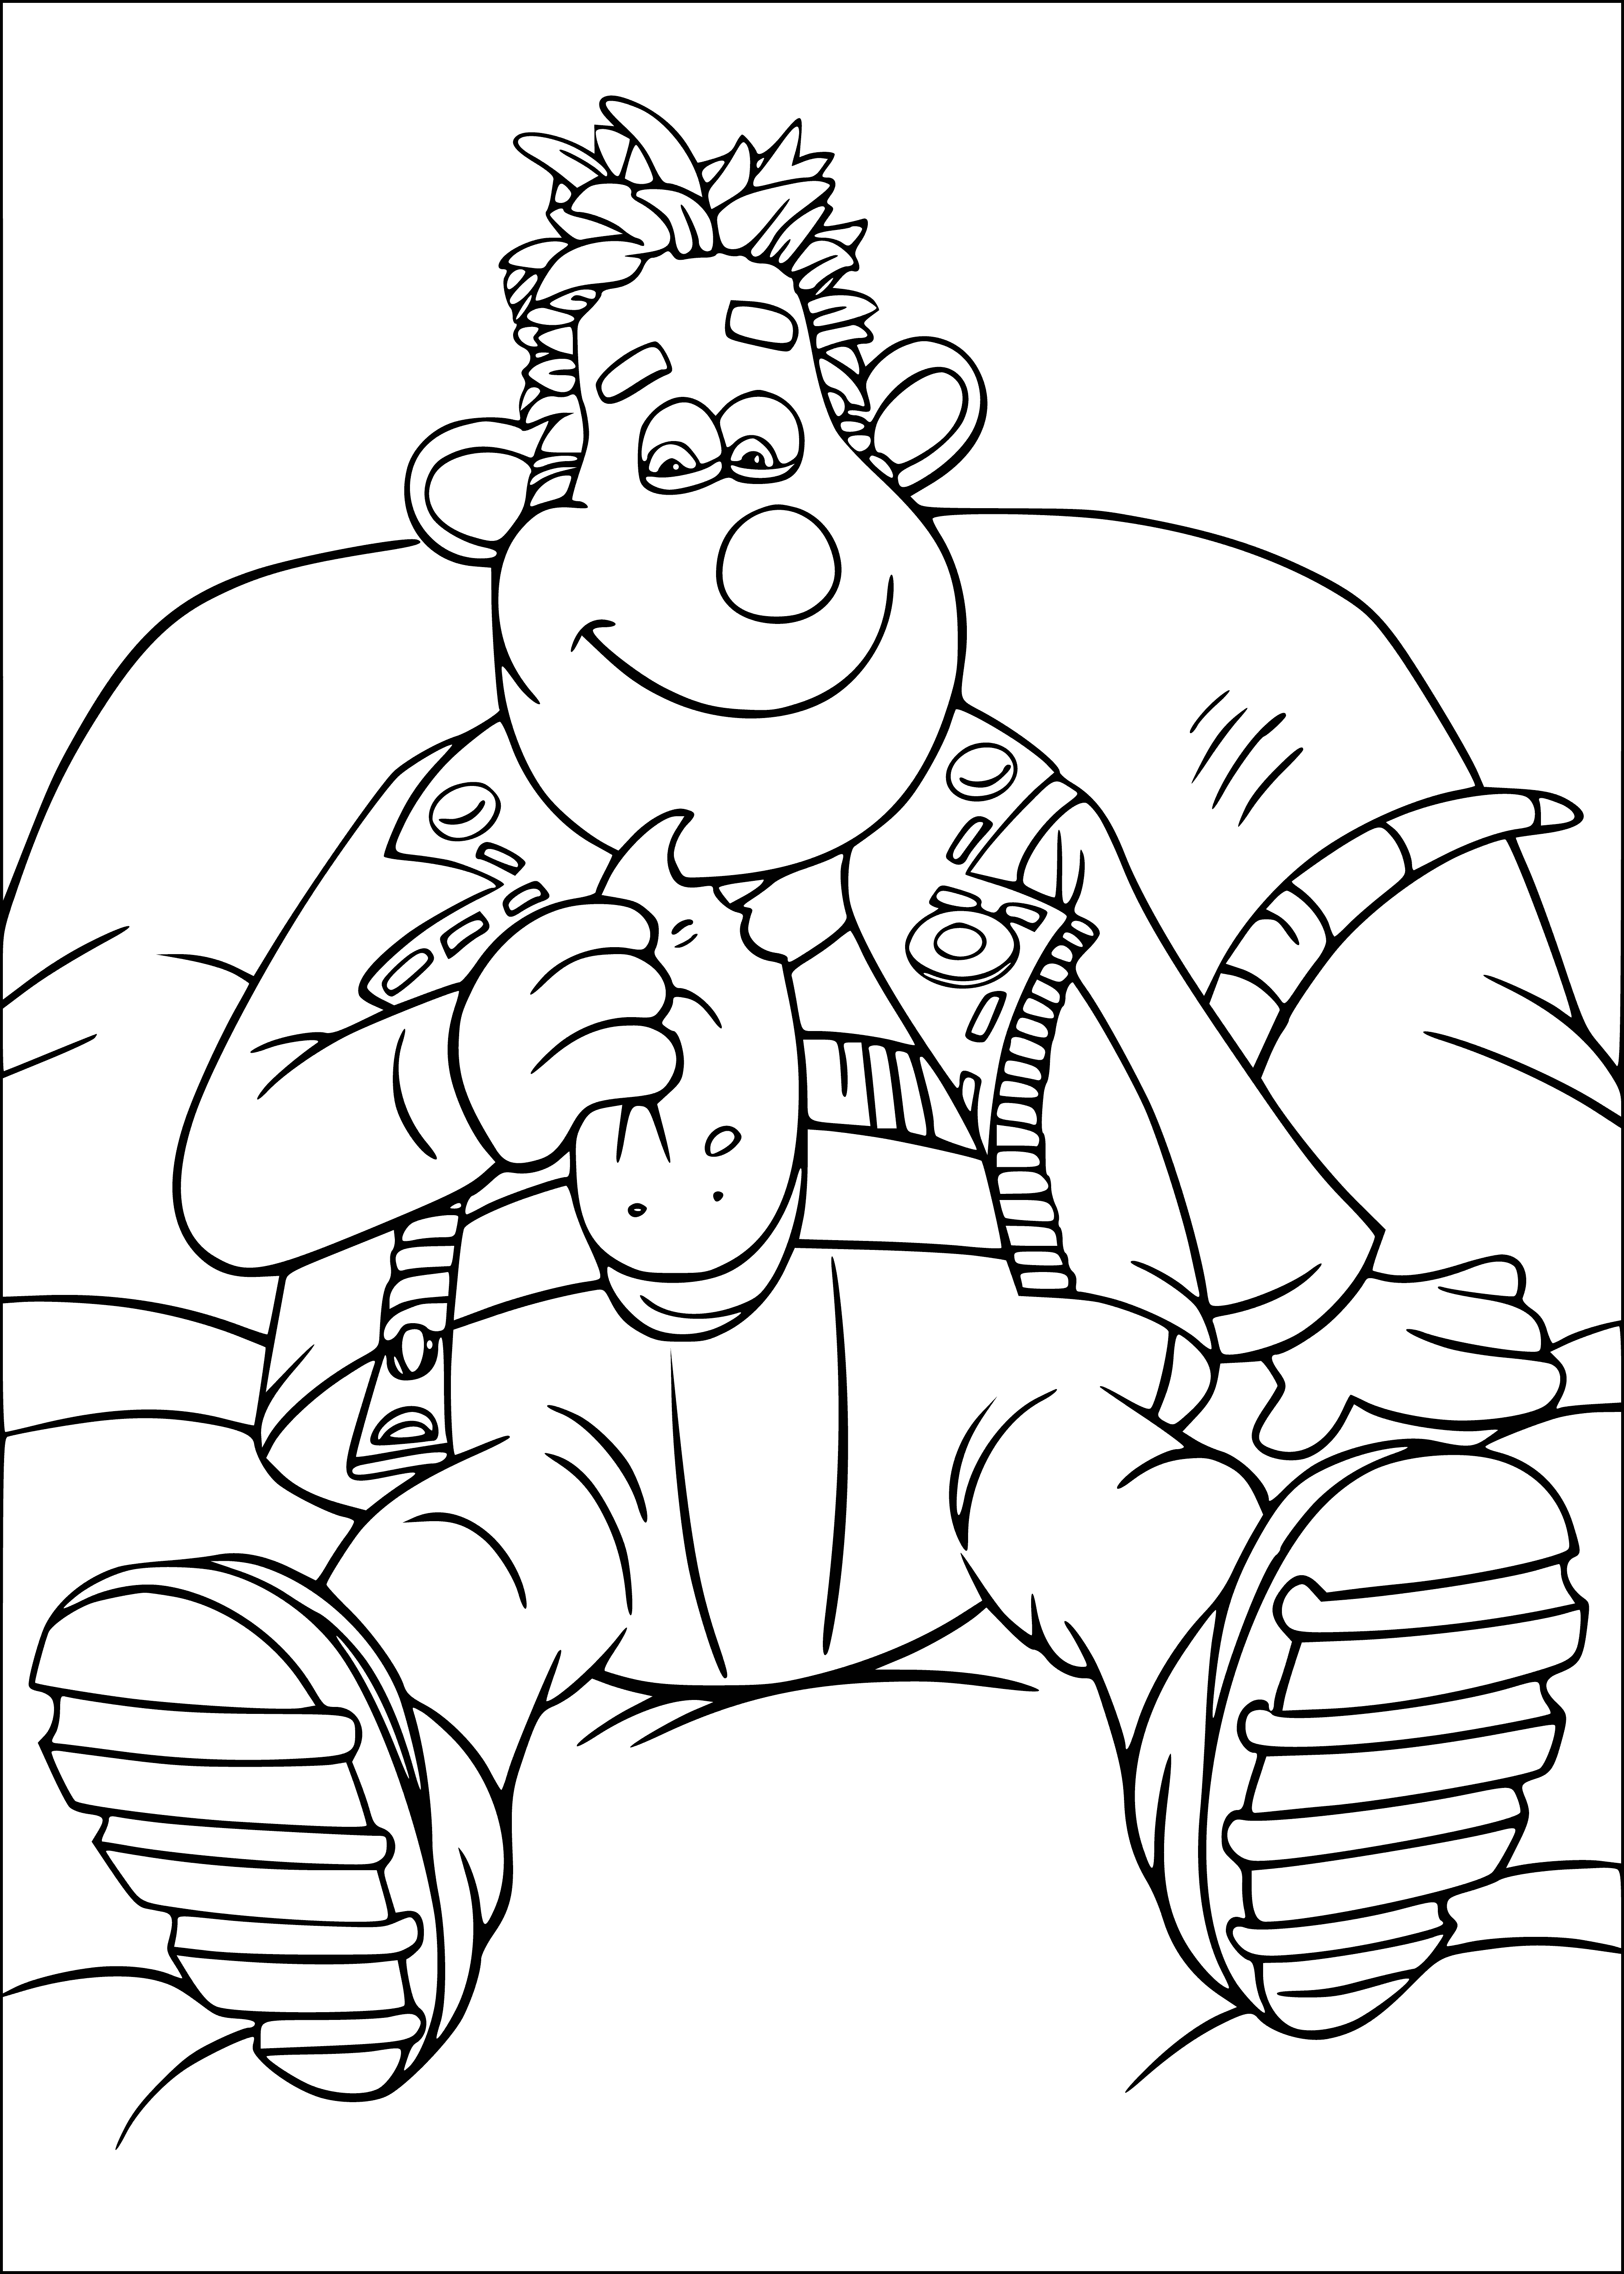 coloring page: A rat stands on hind legs, a scruffy brown coat, long tail & beady eyes. Open-mouthed with sharp teeth, it looks to the left.